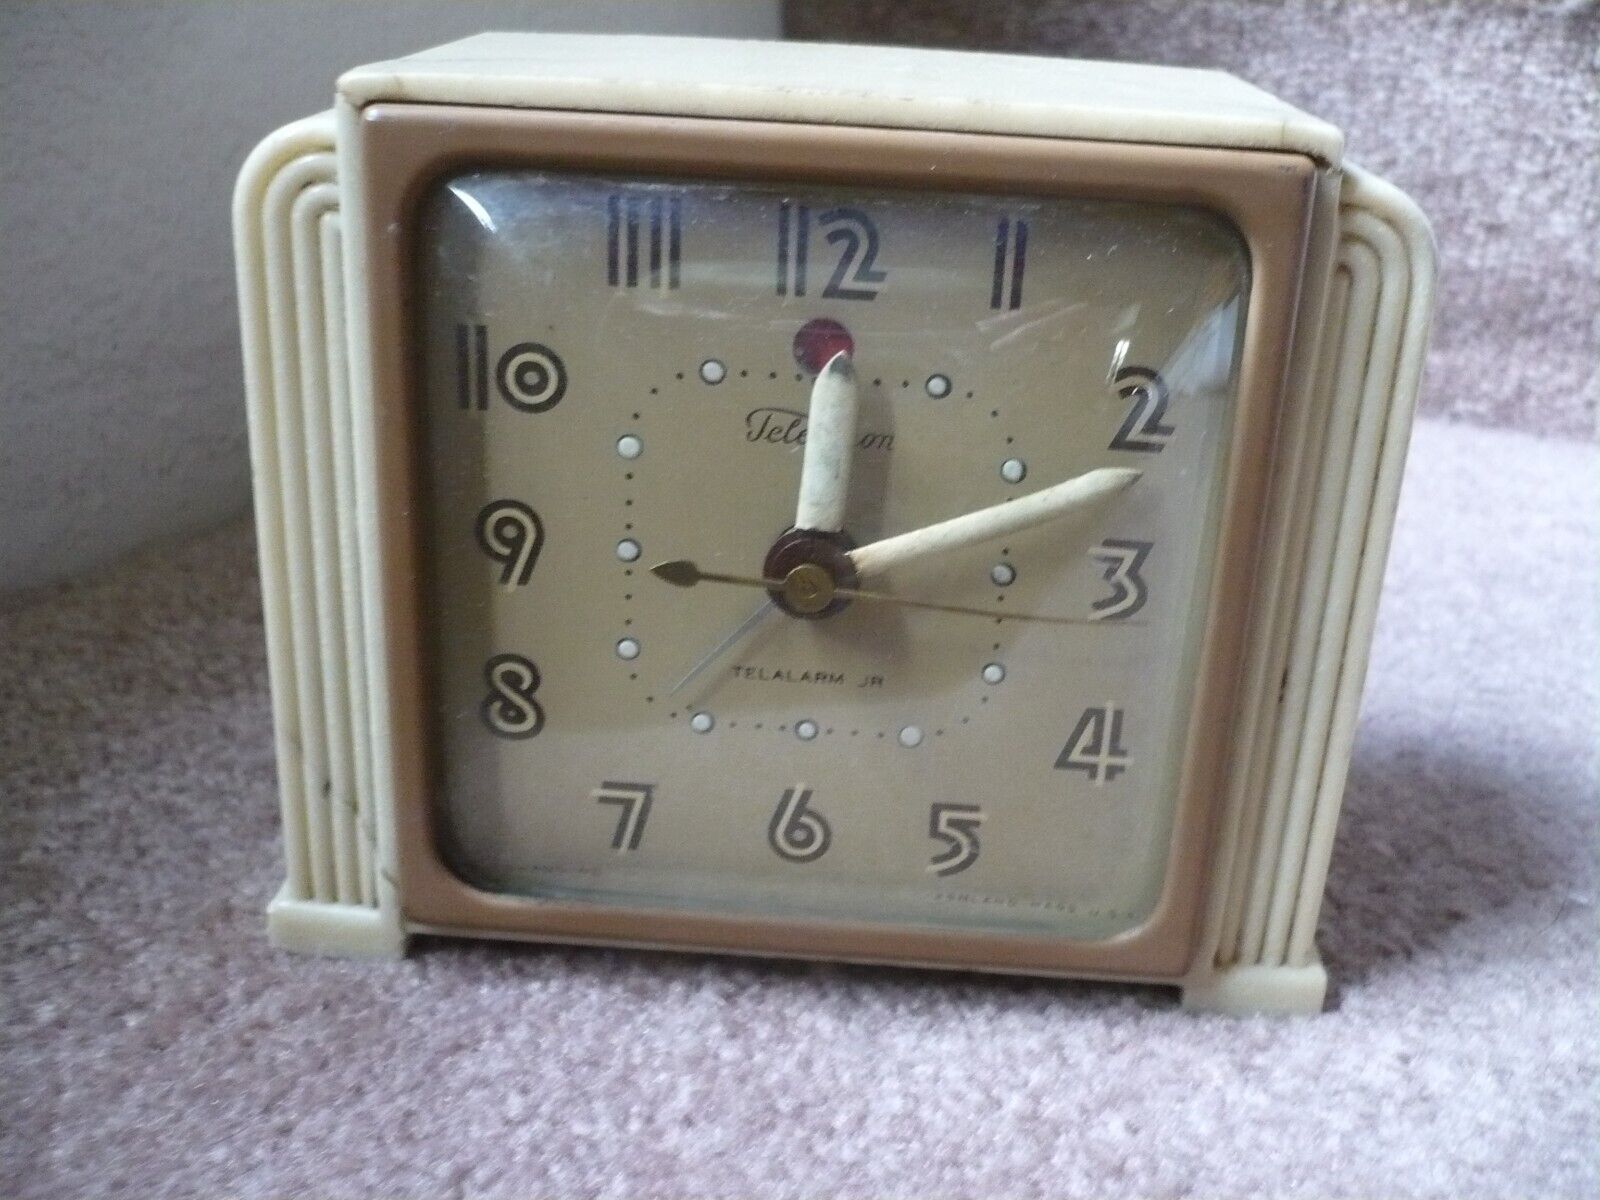 Old Telechron Electric Clock, 7H135, Telalarm Jr., NOT working, For Parts